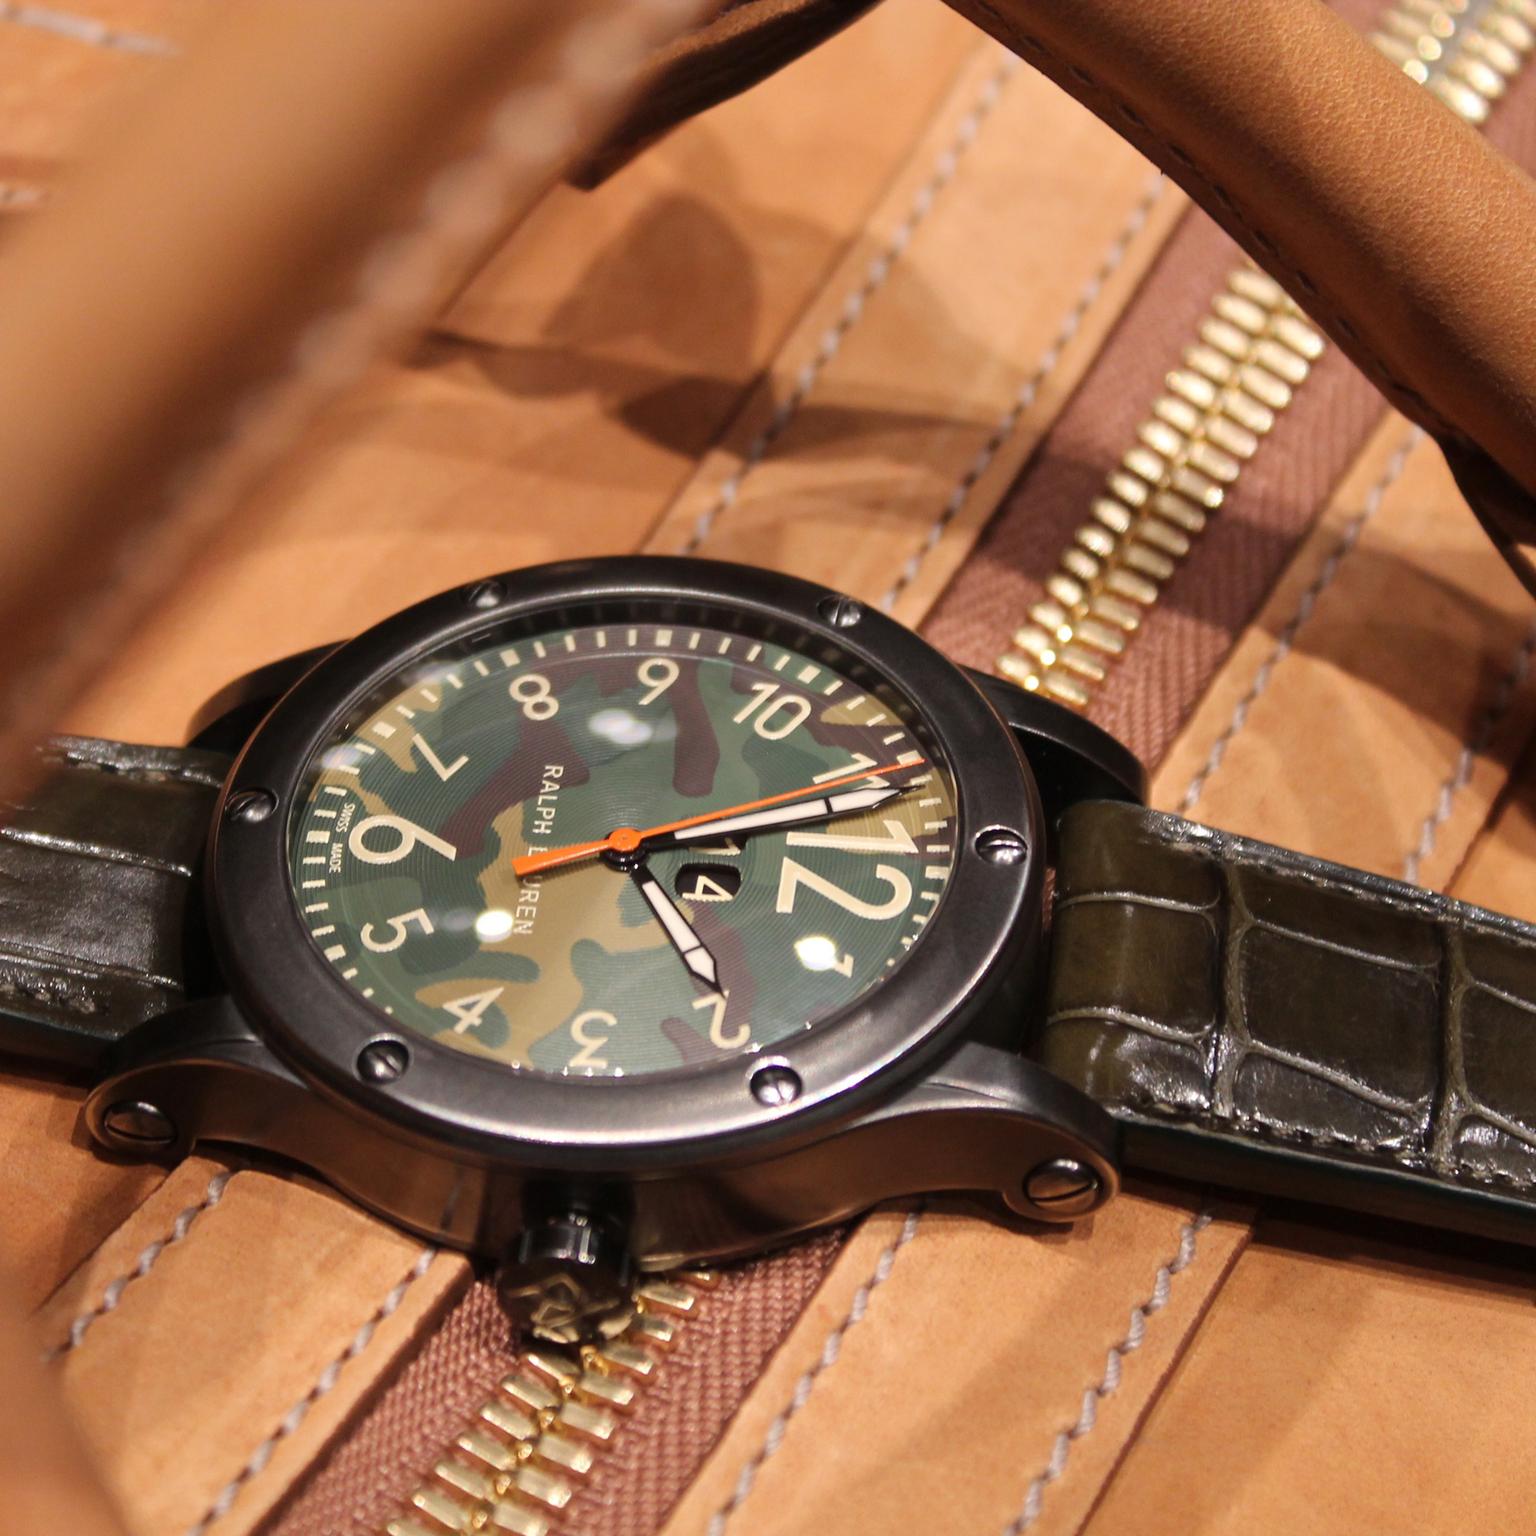 Ralph Lauren RL67 Safari Grand Date watch with camouflage dial